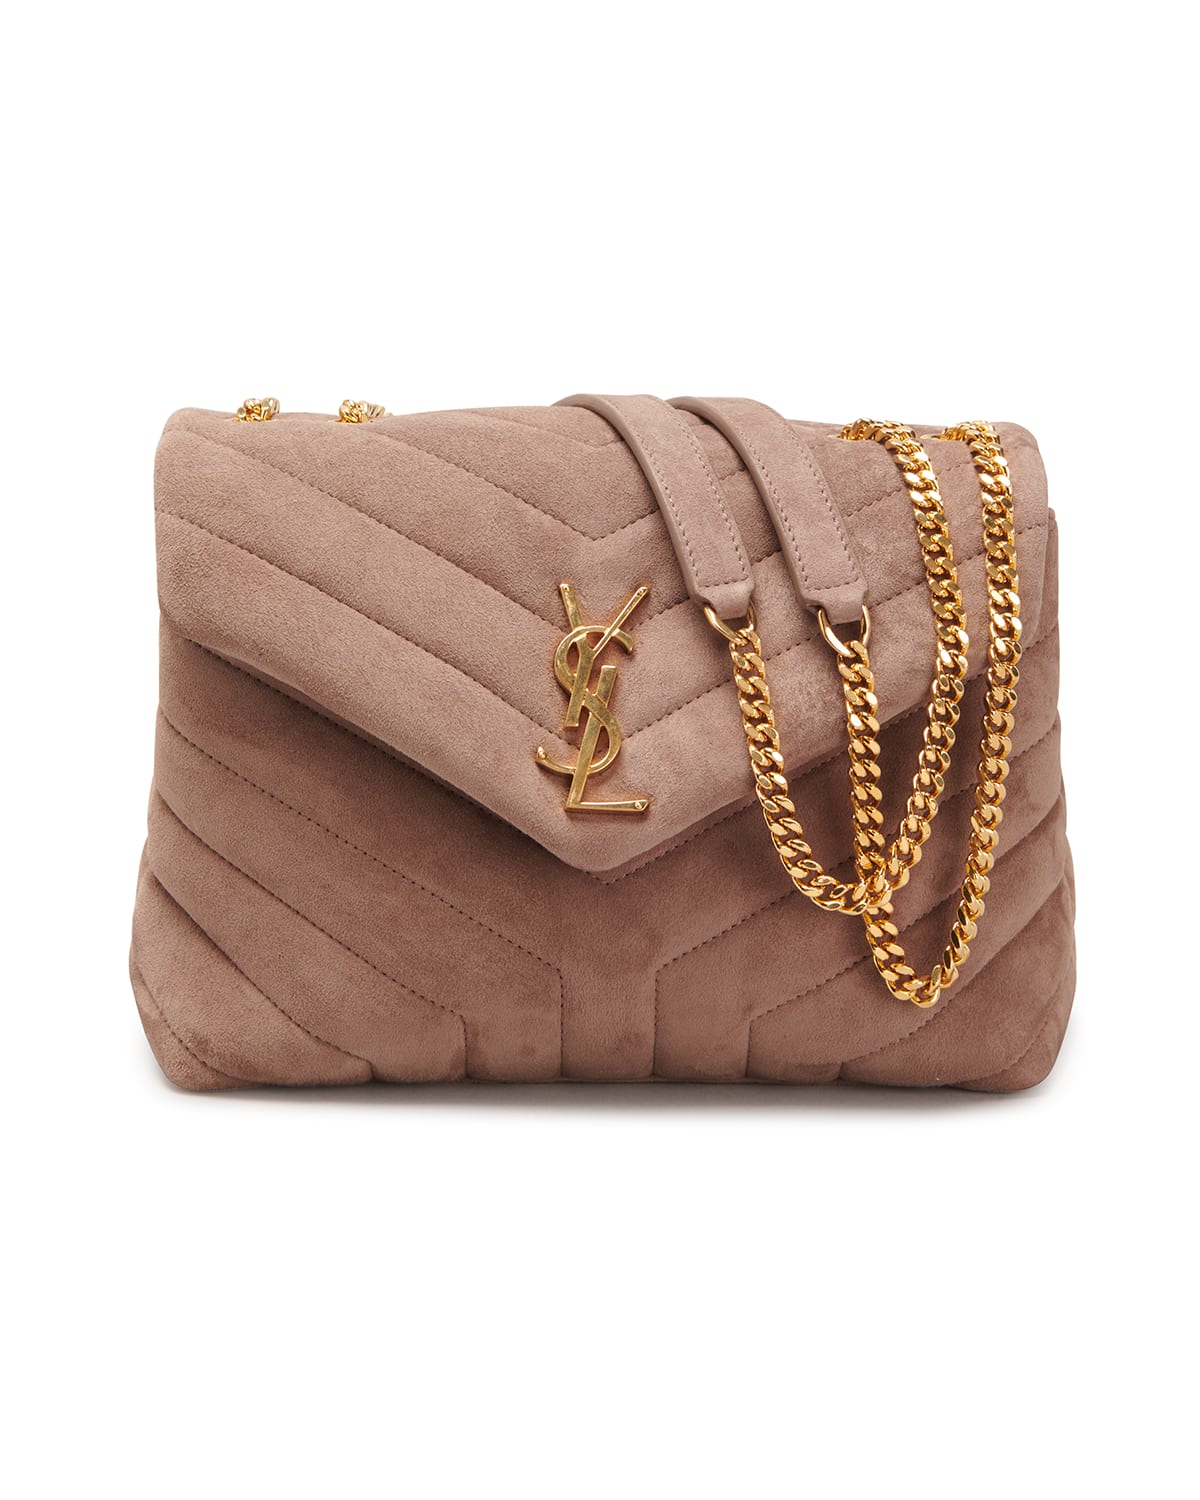 Loulou Small YSL Shoulder Bag in Quilted Suede